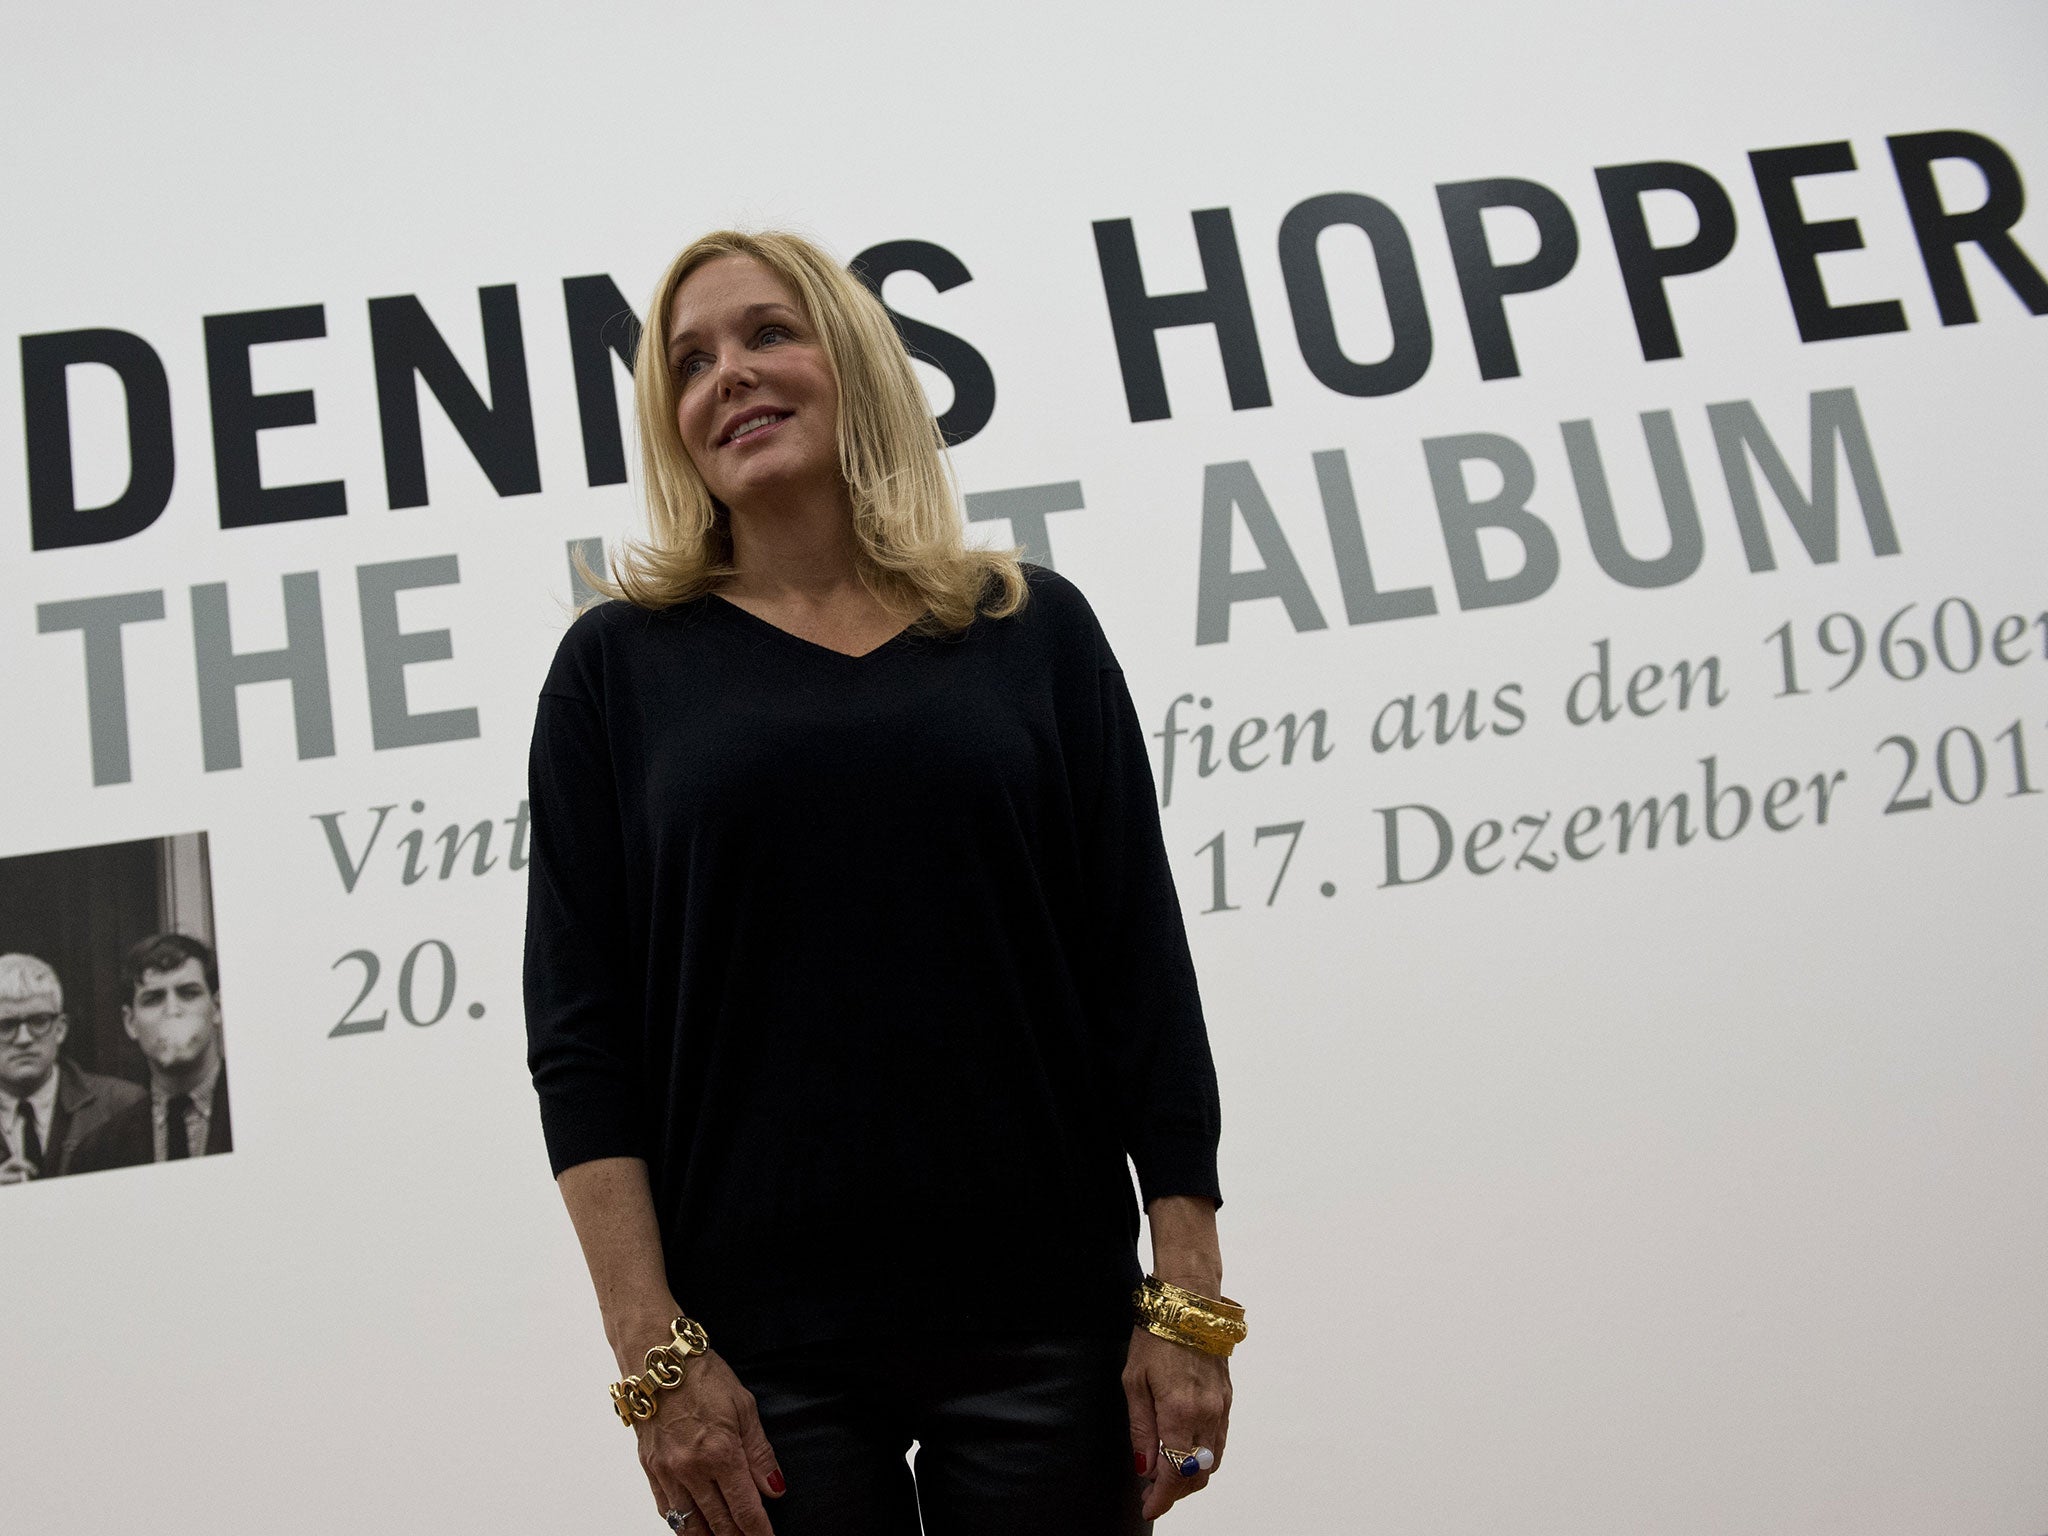 The exhibition 'Dennis Hopper, The Lost Album' was shown in Berlin in 2012. Here, Hopper's daughter Marin Hopper poses at the Martin-Gropius-Bau museum ahead of that exhibition's opening